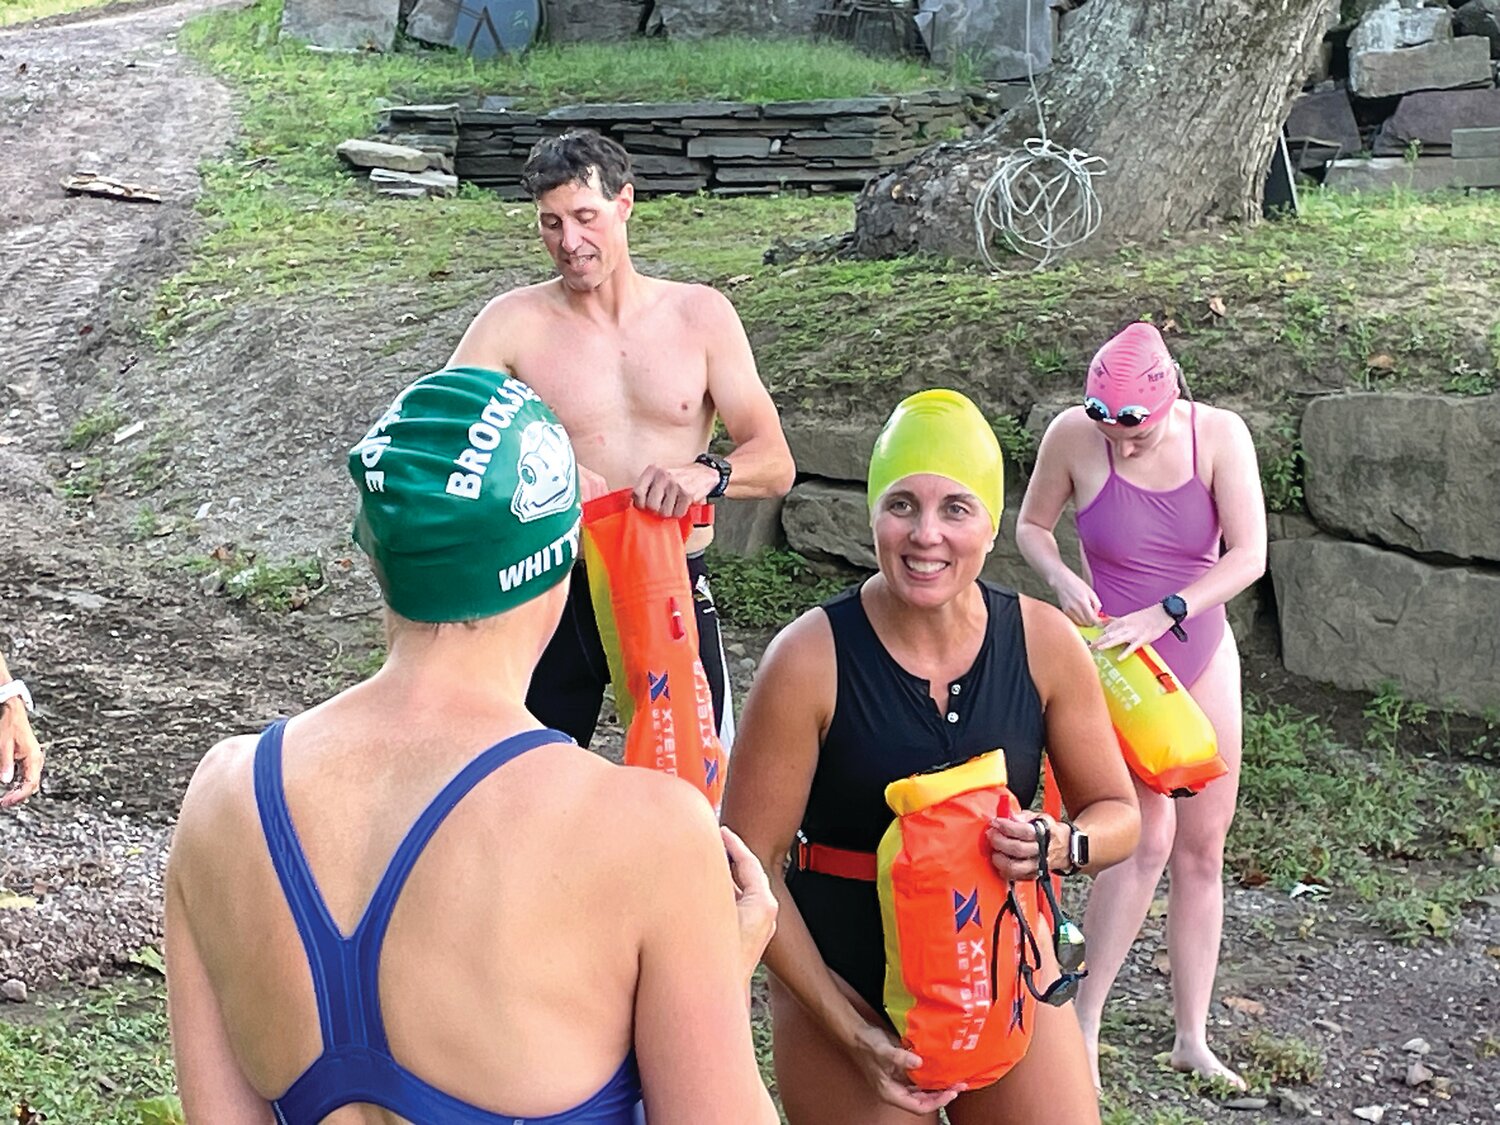 About 5 miles north of New Hope, Julie Titcomb Wittemore, Kevin McKale, Kristi Symchik and Abby Silberman look forward to their weekly swim in the Delaware River.